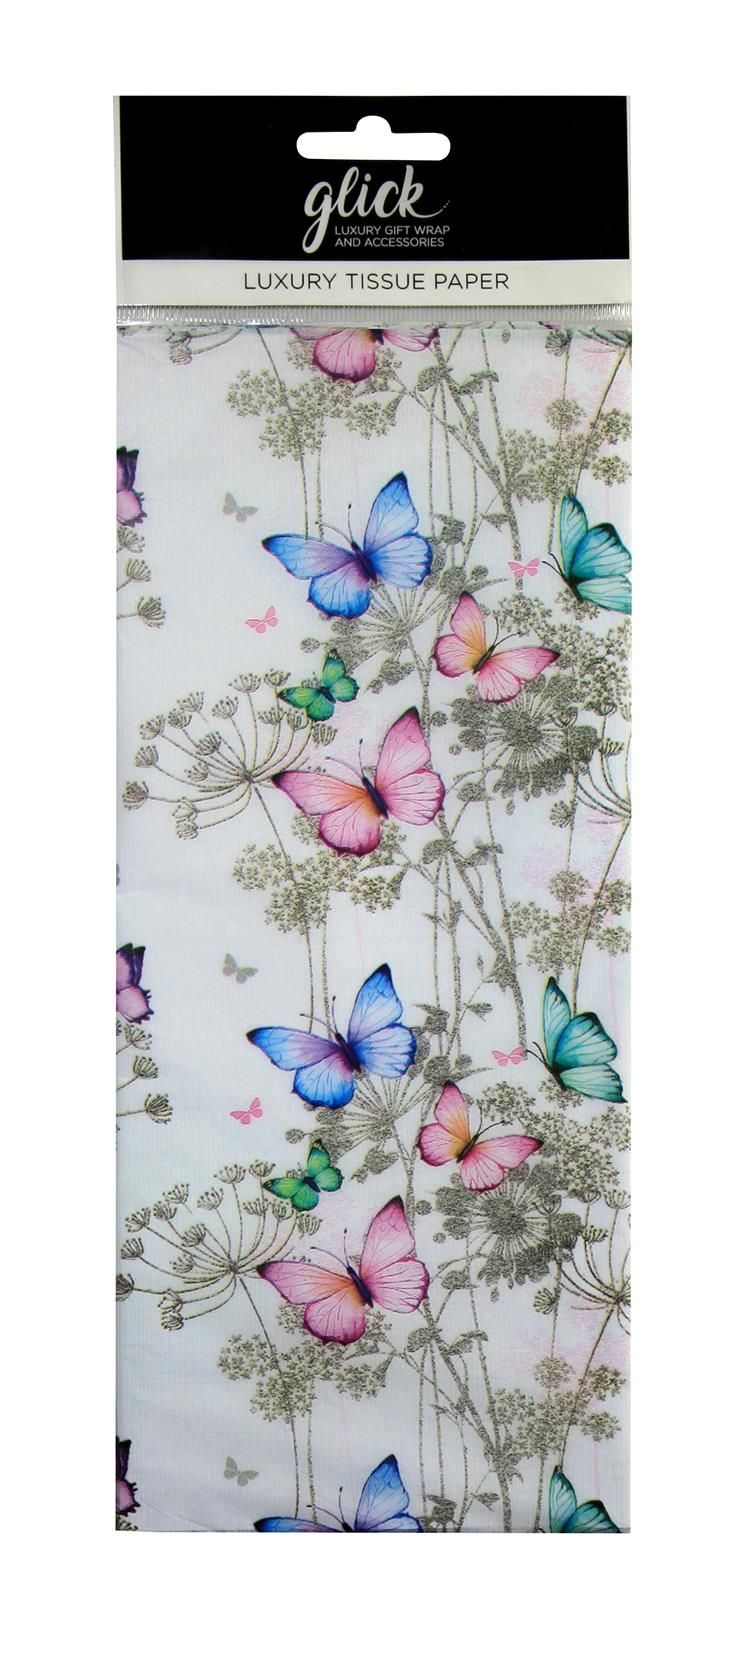 Butterfly Print Luxury Tissue Paper - Pack Of 4 LARGE Sheets - Luxury TISSU